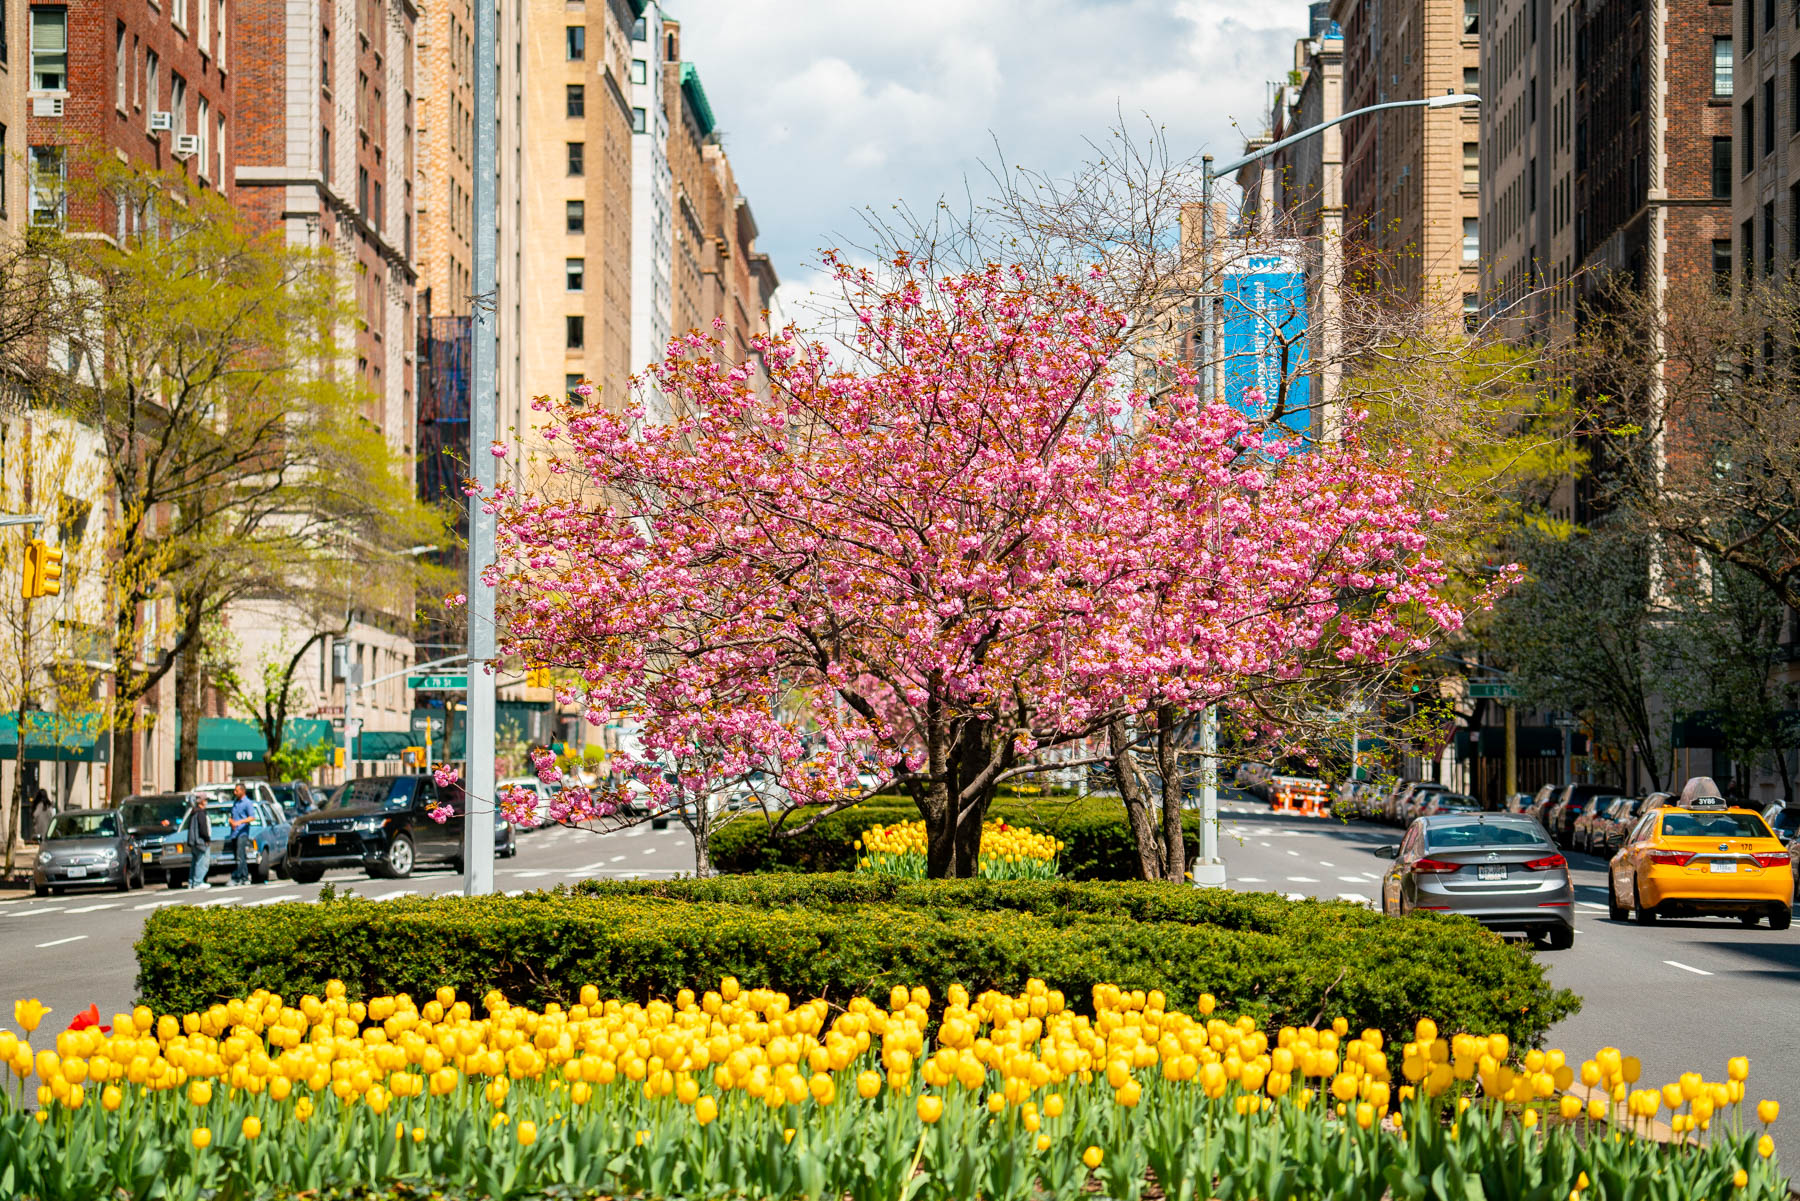 where to find tulips in New York City
Park Avenue Tulips NYC